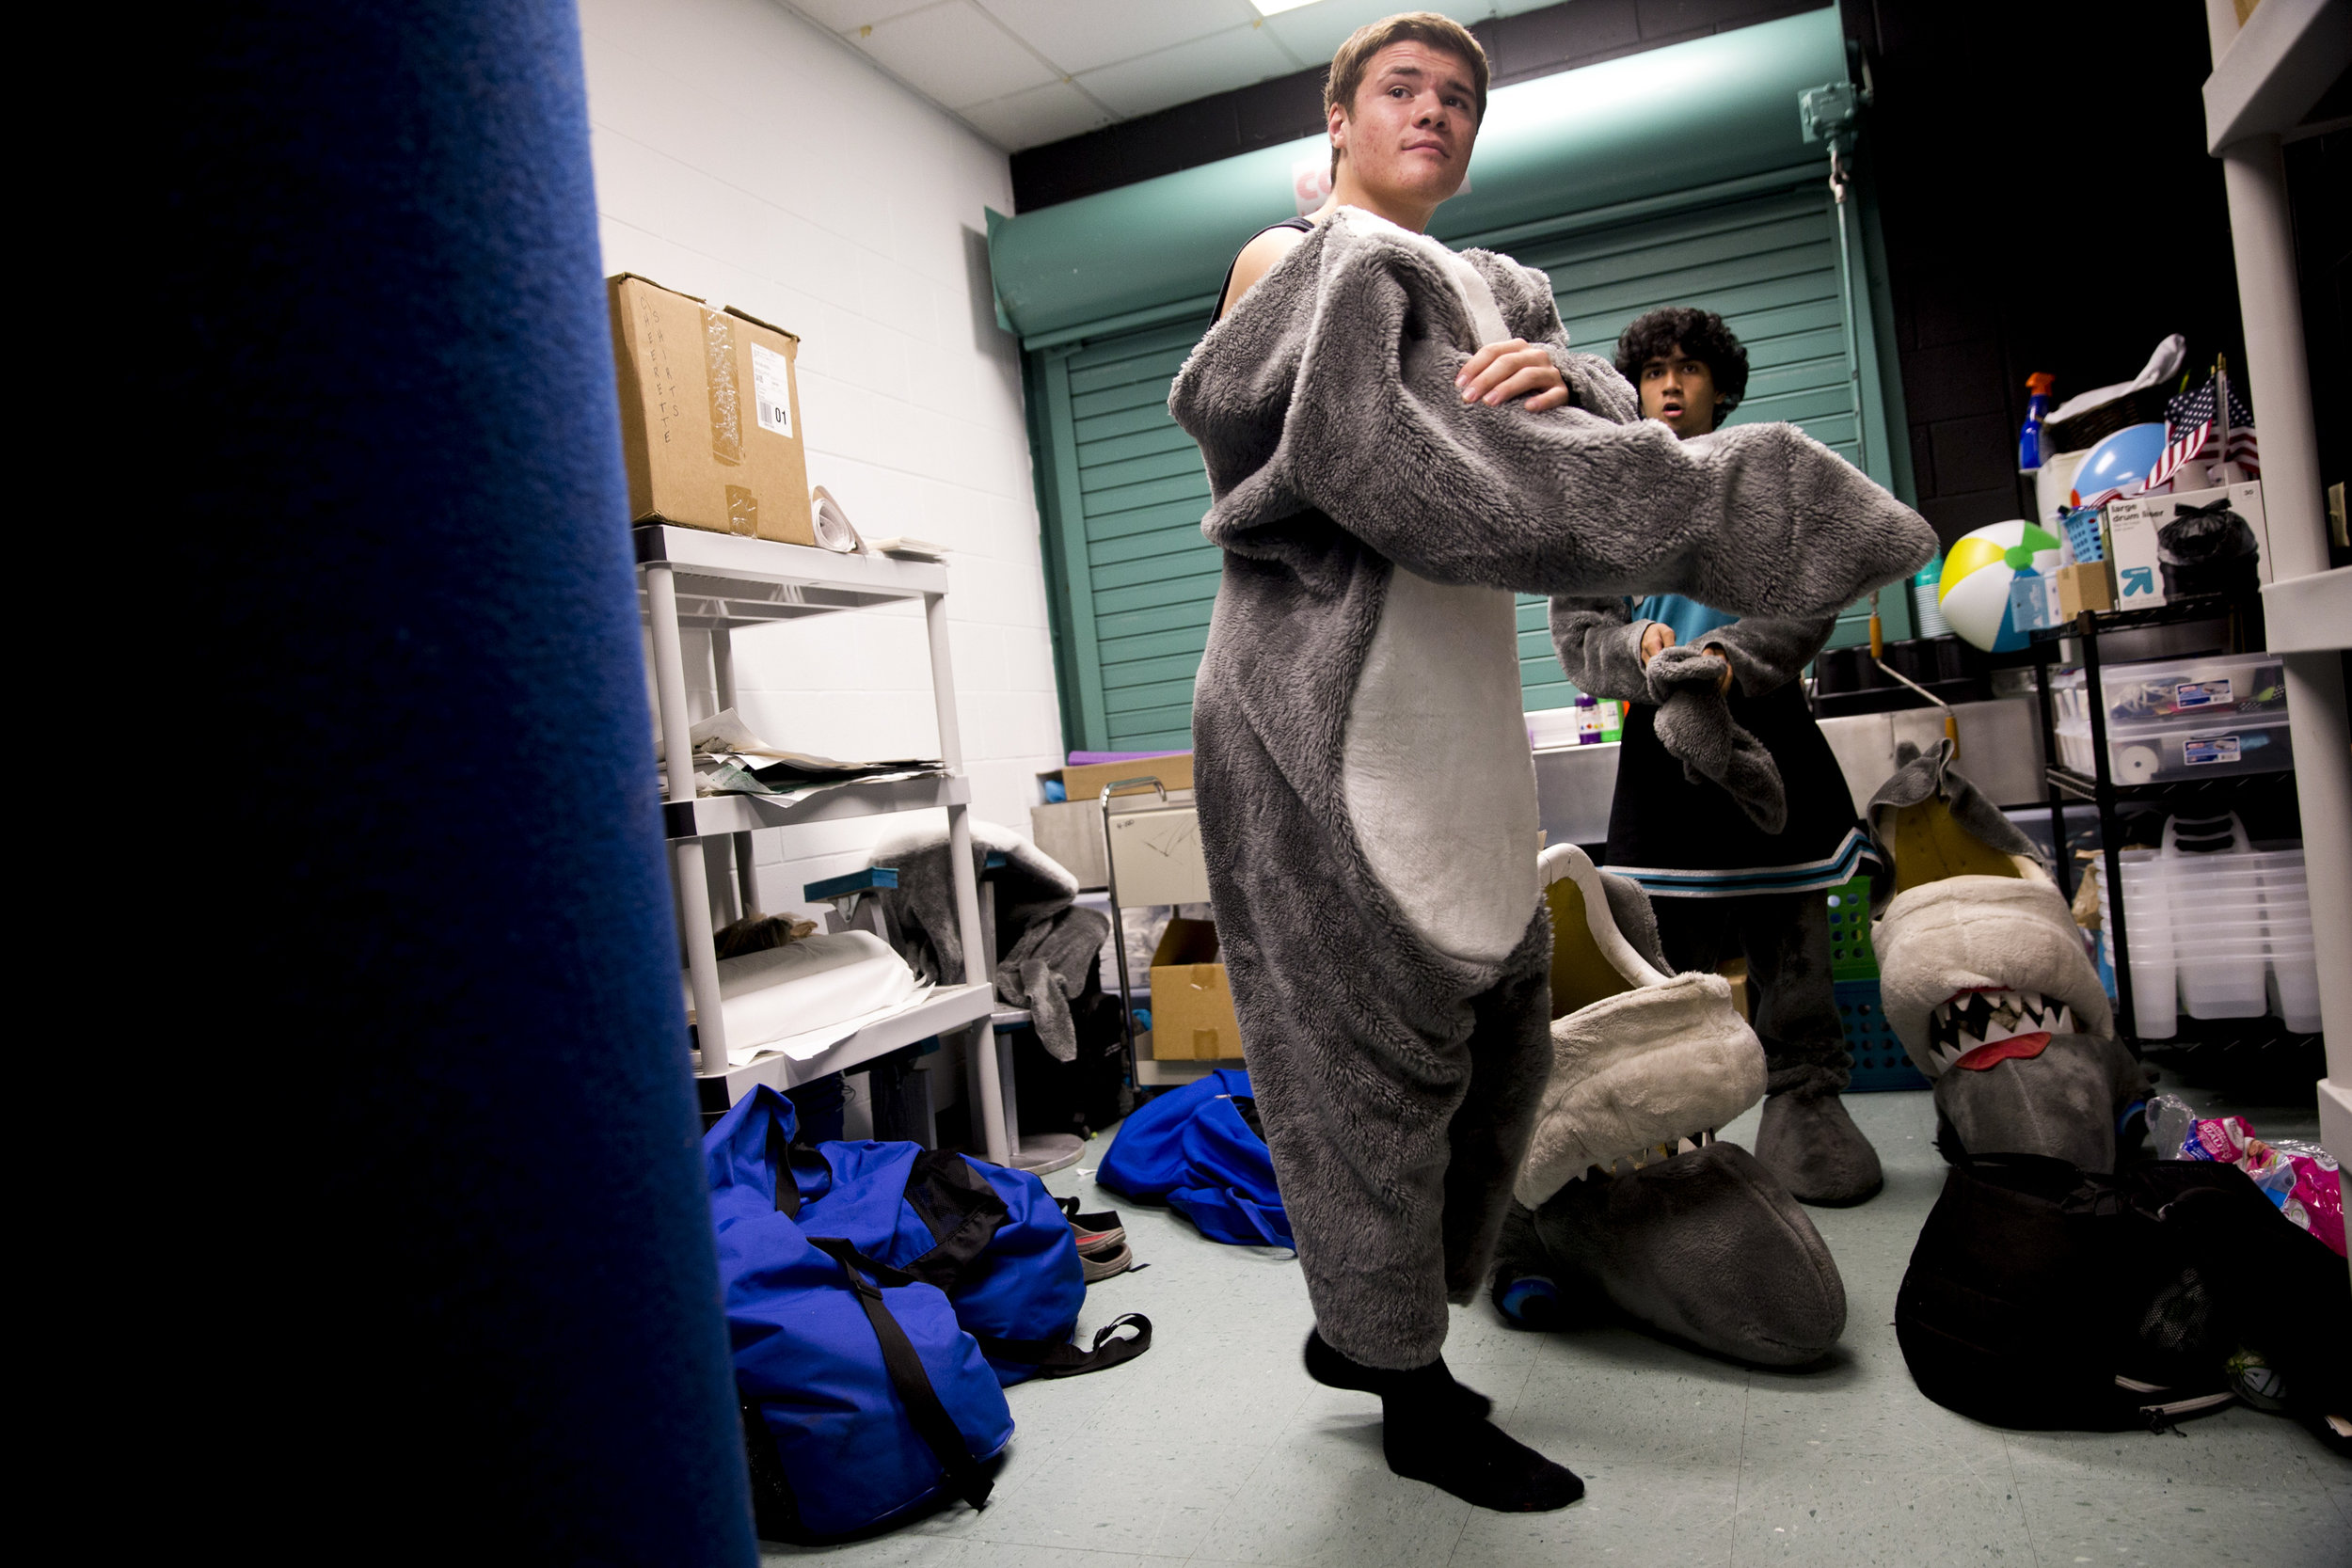  Gulf Coast High School juniors Dylan Spelman, 16, left, and Matthew Masin, 17, adorn the costumes for the school's mascots Sharkey and Sharkette, respectively, prior to a football game against Hialeah High School Friday, September 2, 2016 at Gulf Co